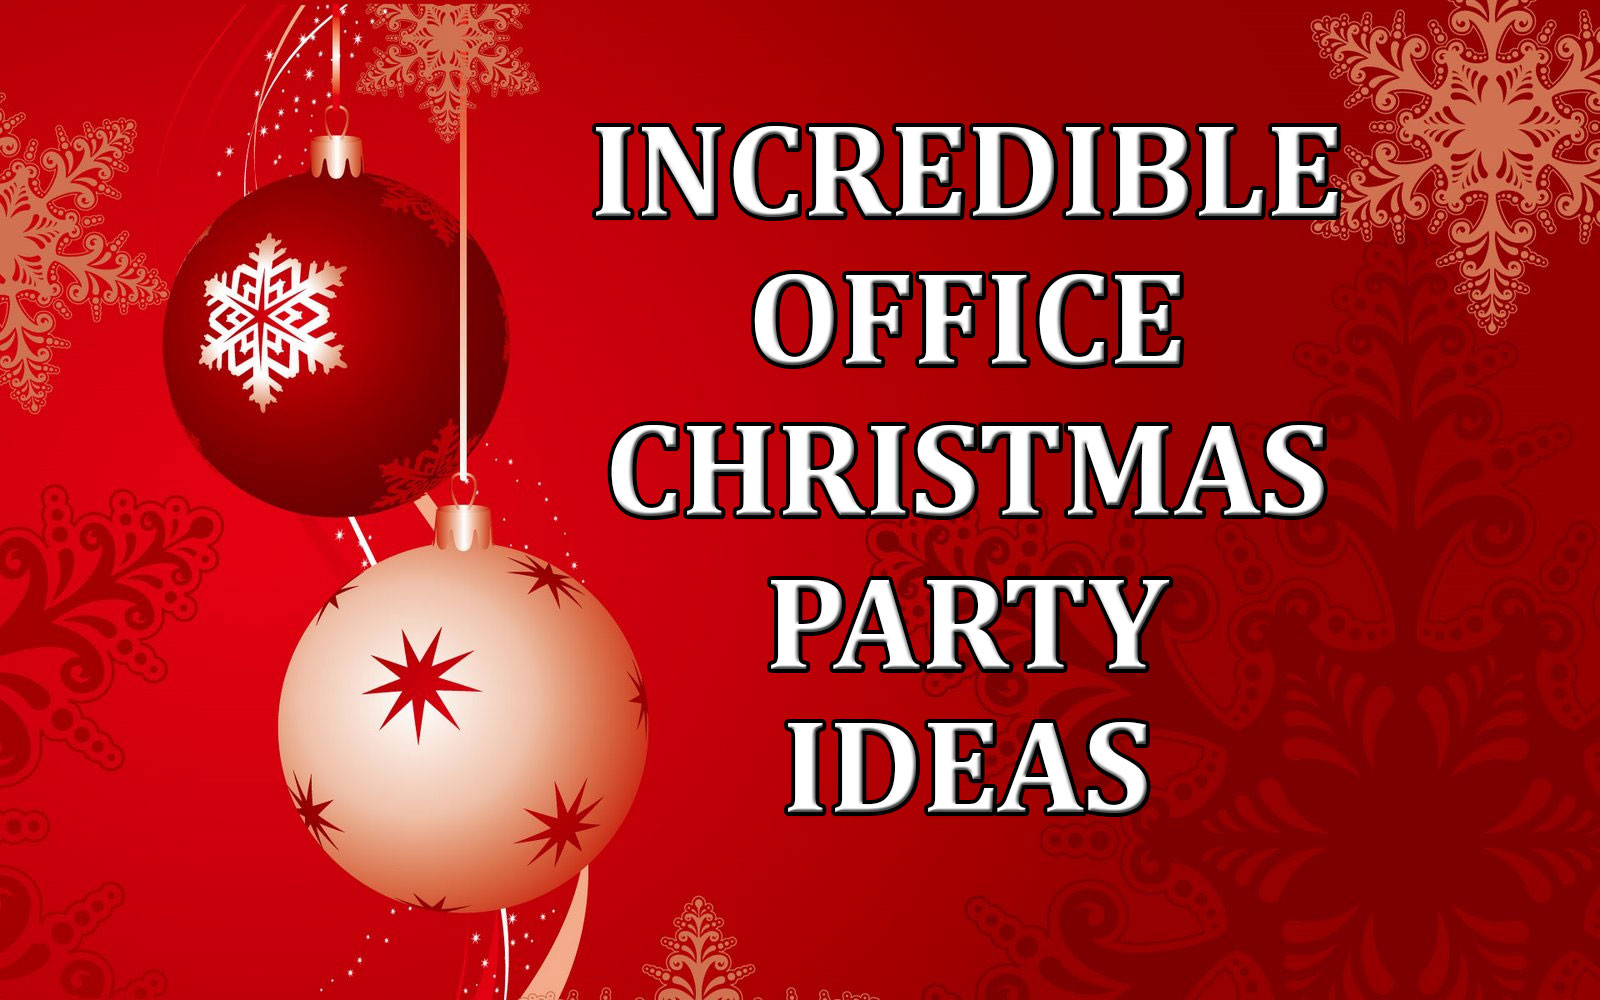 Office Holiday Party Theme Ideas
 Incredible fice Christmas Party Ideas edy Ventriloquist